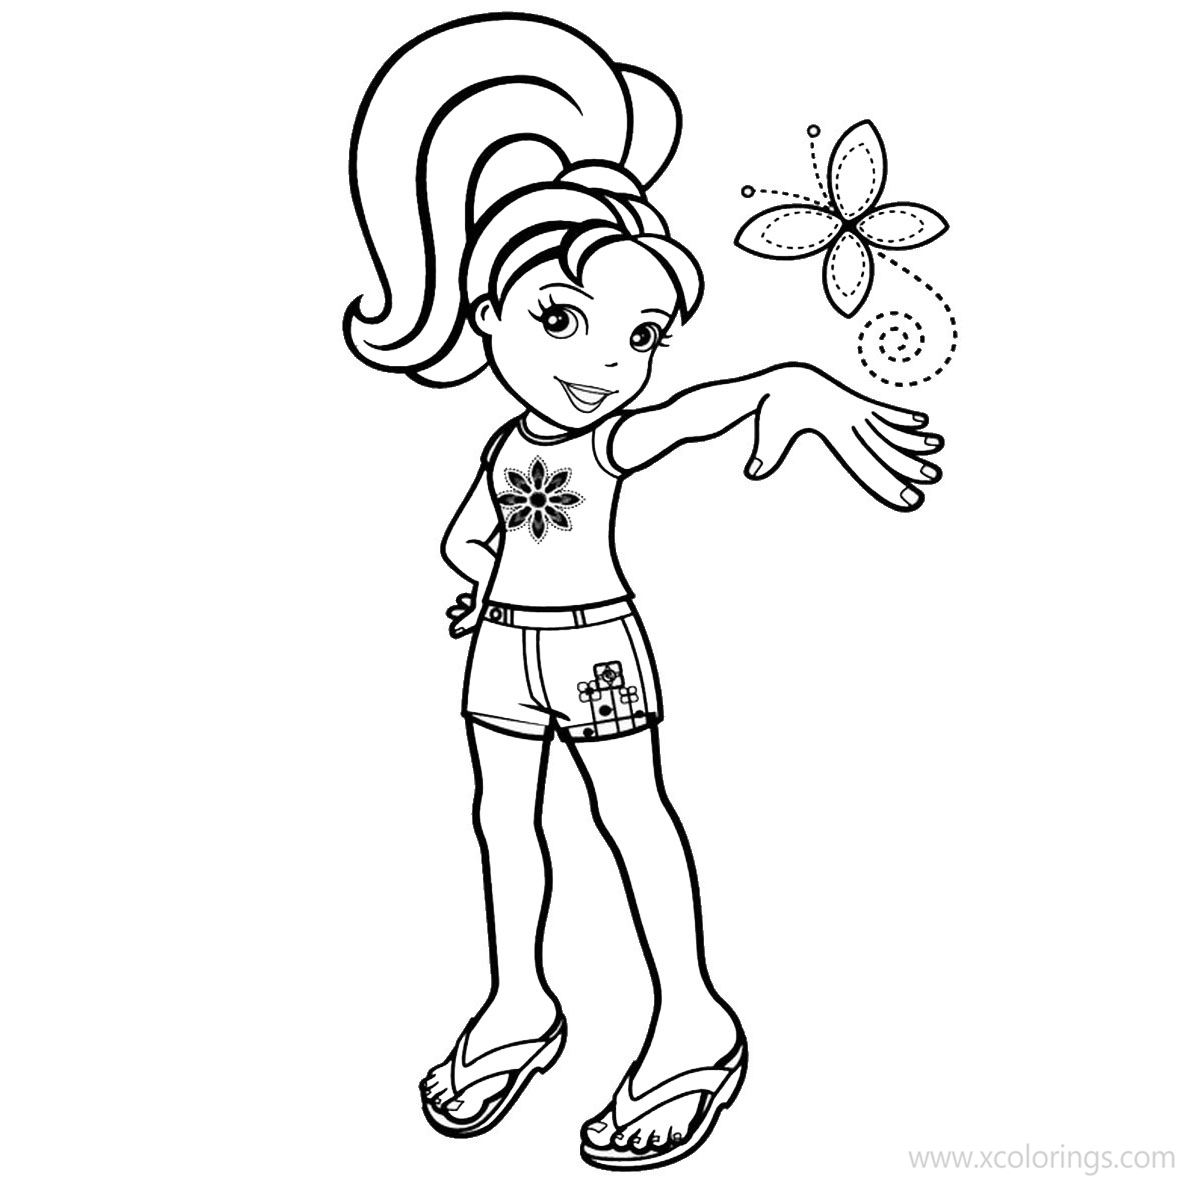 Free Polly Pocket and a Butterfly Coloring Pages printable